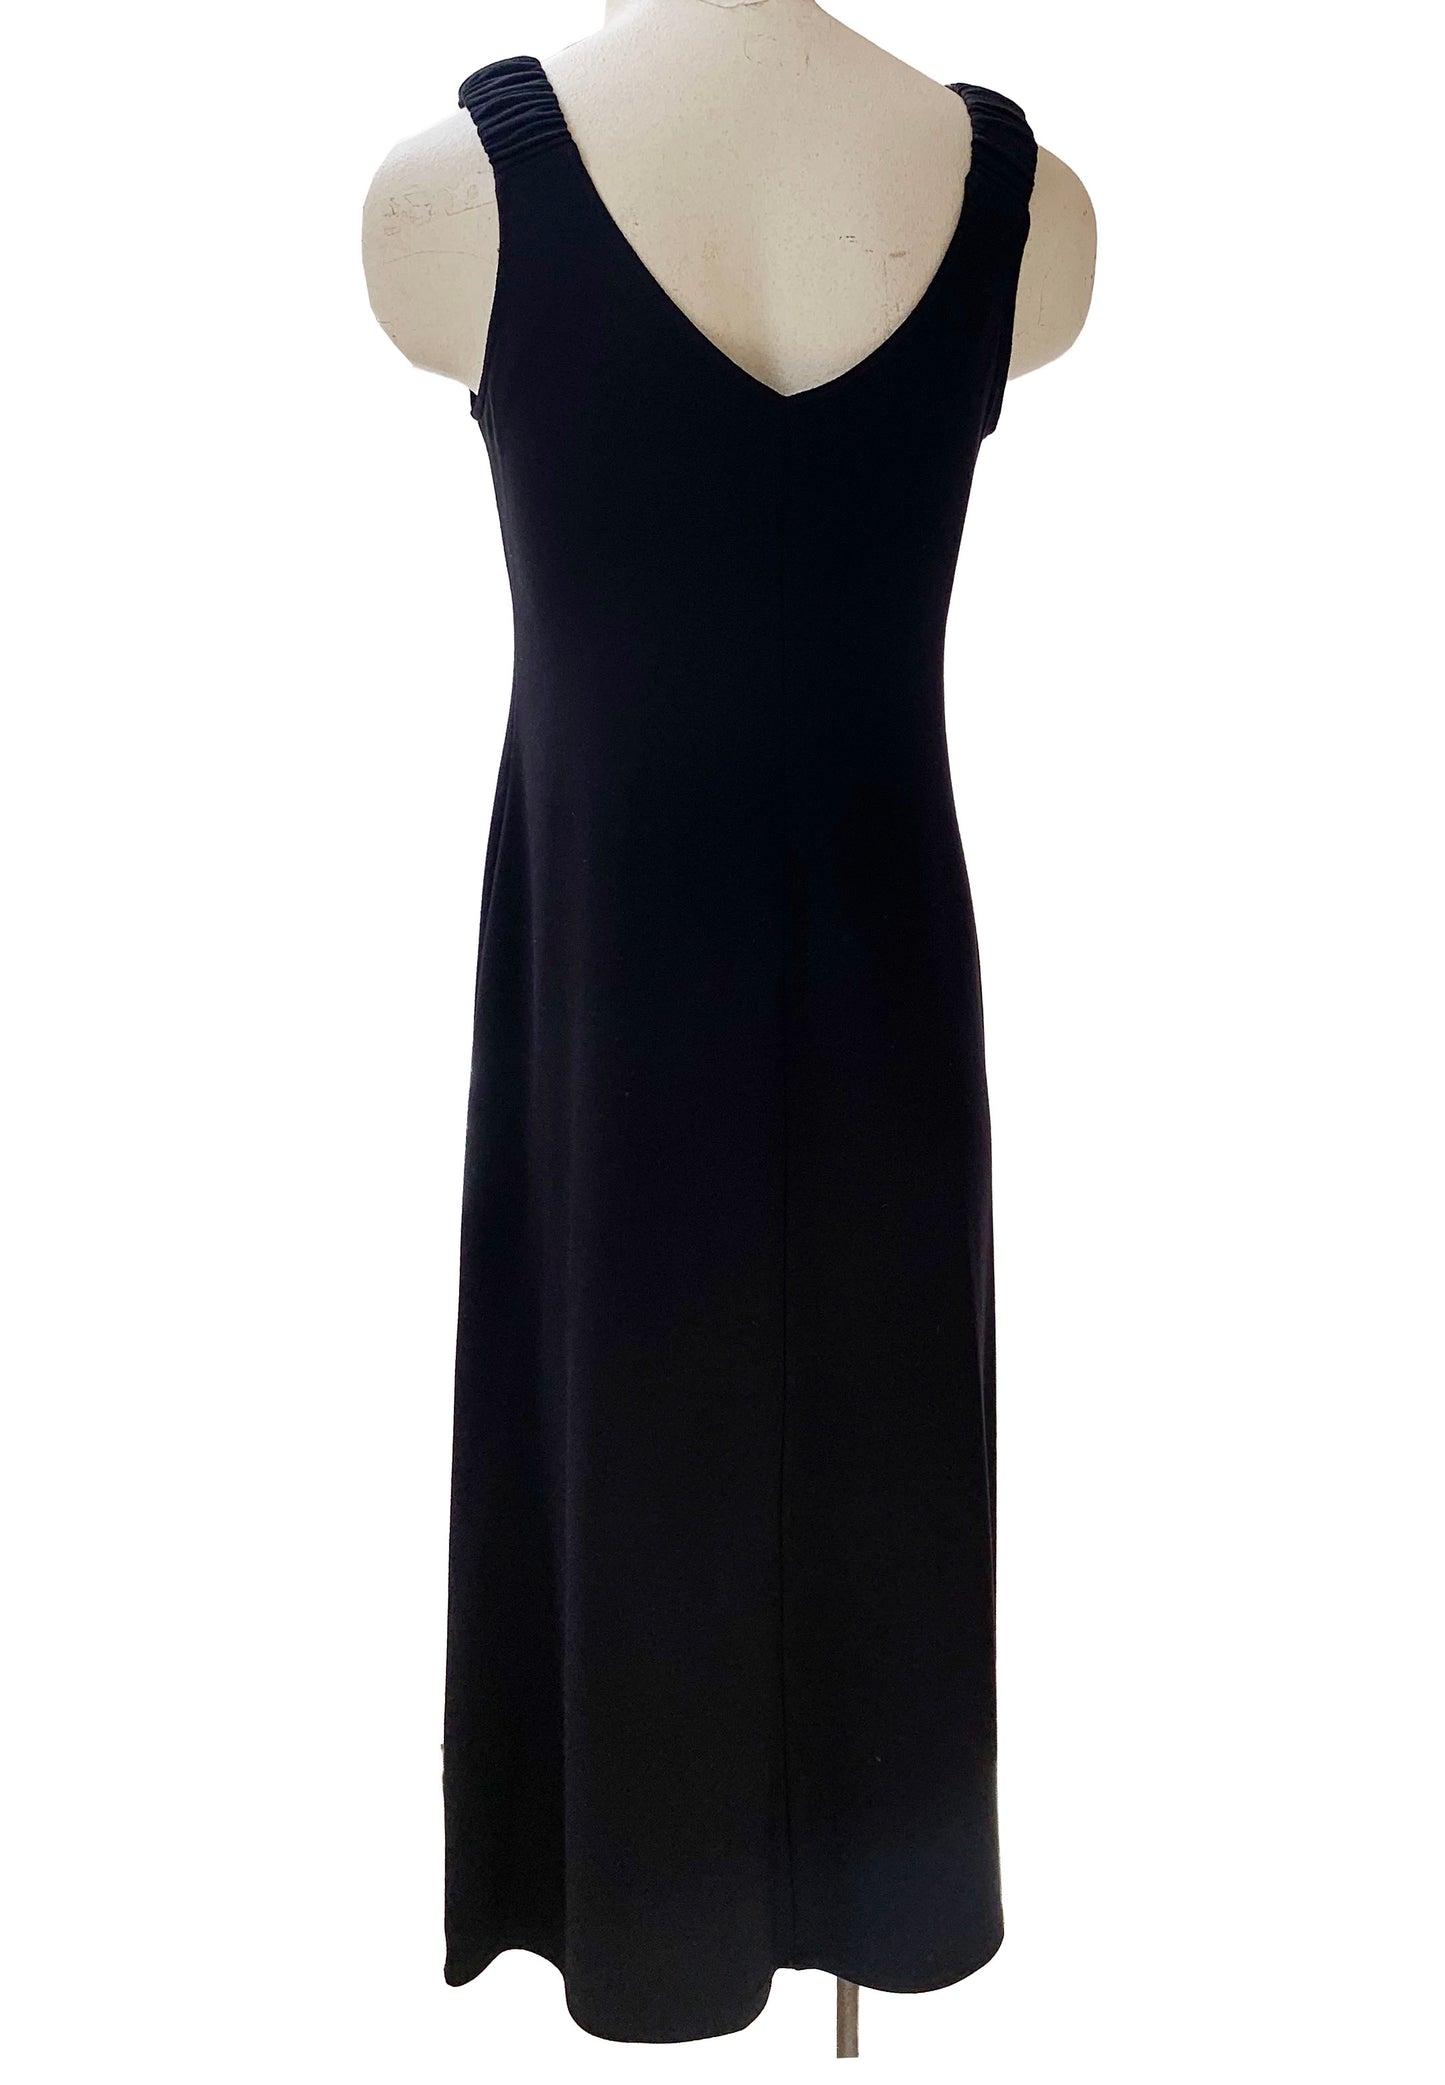 Mary Tank Dress by Compli K, Black, back view, wide straps with ruching detail at the shoulders, V-neck at front and back, slight A-line shape, ankle length, eco-fabric, bamboo/viscose, sizes XS to XXL, made in Montreal 